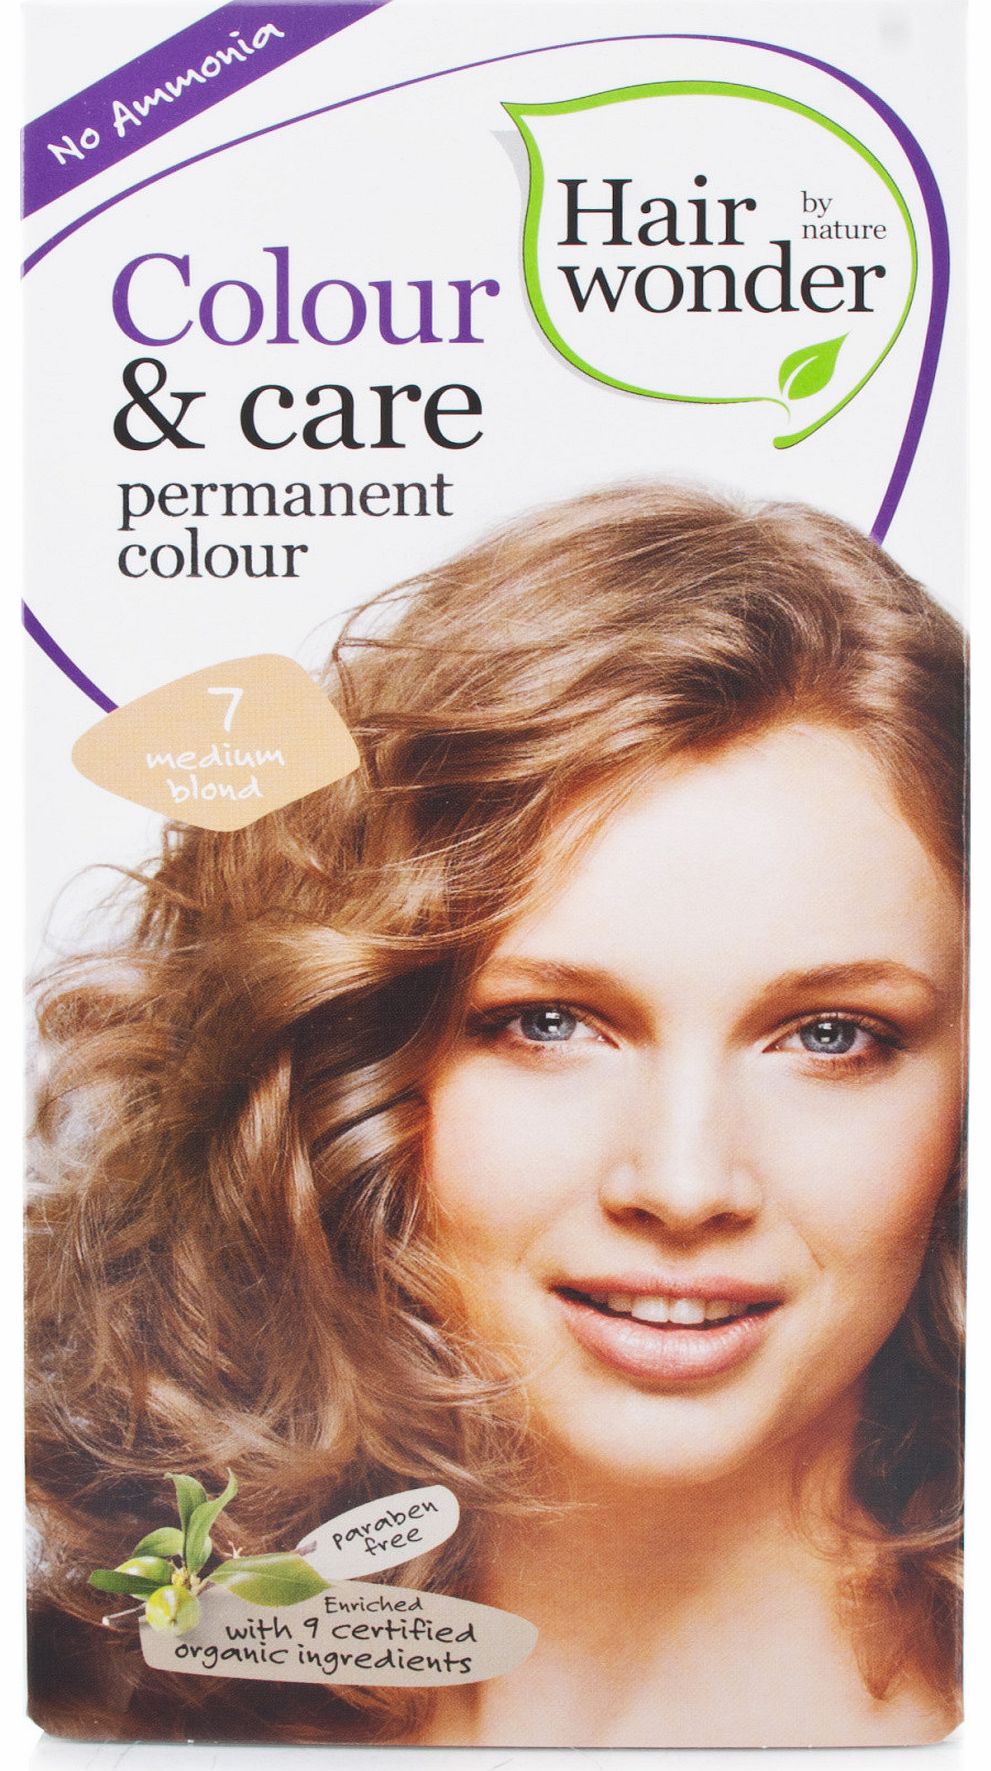 Hair Wonder Colour and Care Medium Blond 7provides better grey coverage and colour stays longer (for at least 6-8 weeks). The cream formulation makes application easy and also leaves fewer residues on the scalp. This ammonia free, permanent hair colo